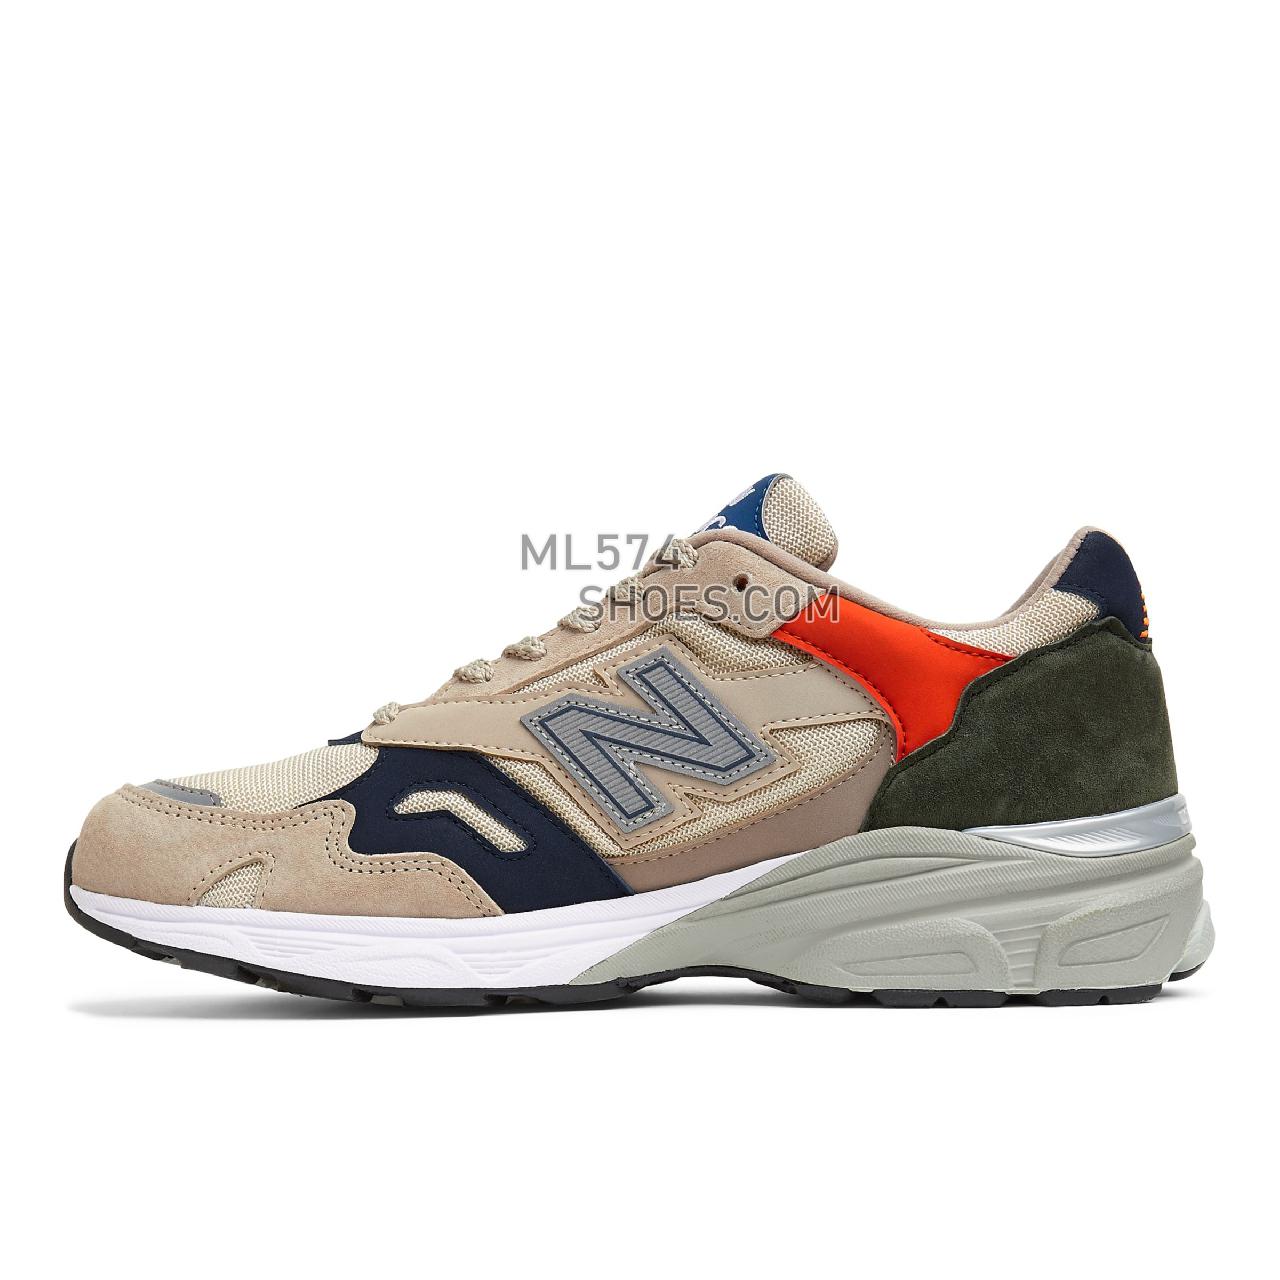 New Balance Made in UK 920 - Men's Made in USA And UK Sneakers - Sand with dark green and orange - M920UPG